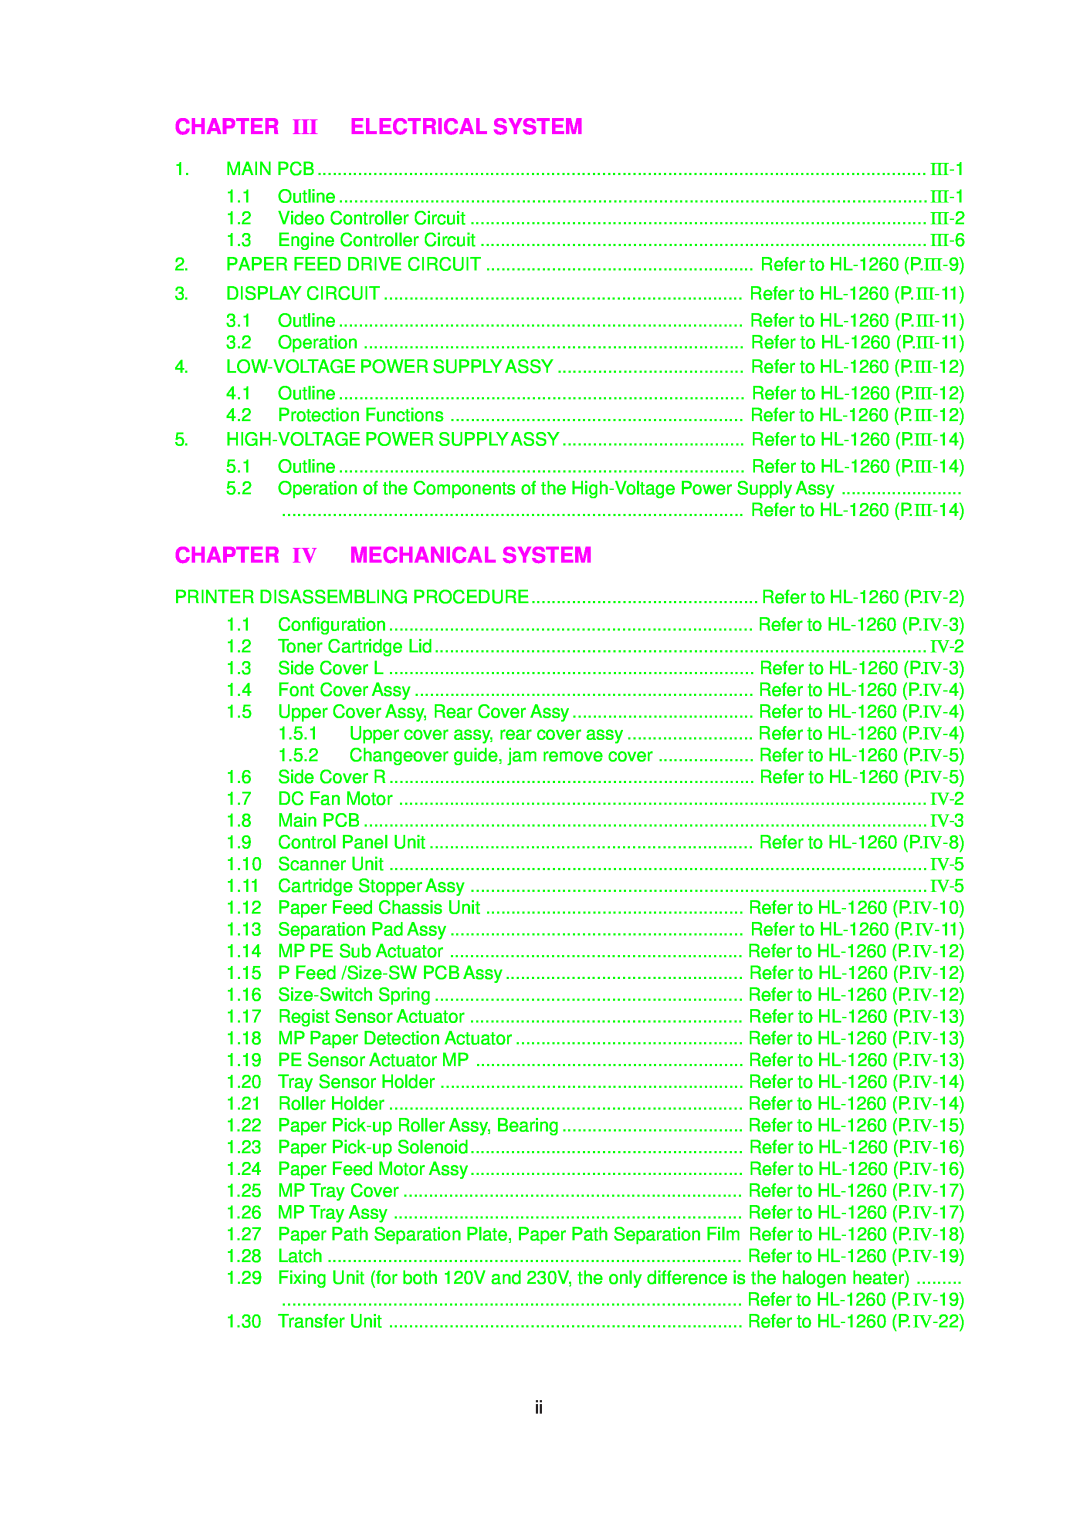 Brother 1660 service manual Chapter Iii Electrical System, Mechanical System, III-1, III-2, III-6, IV-2, IV-3, IV-5 